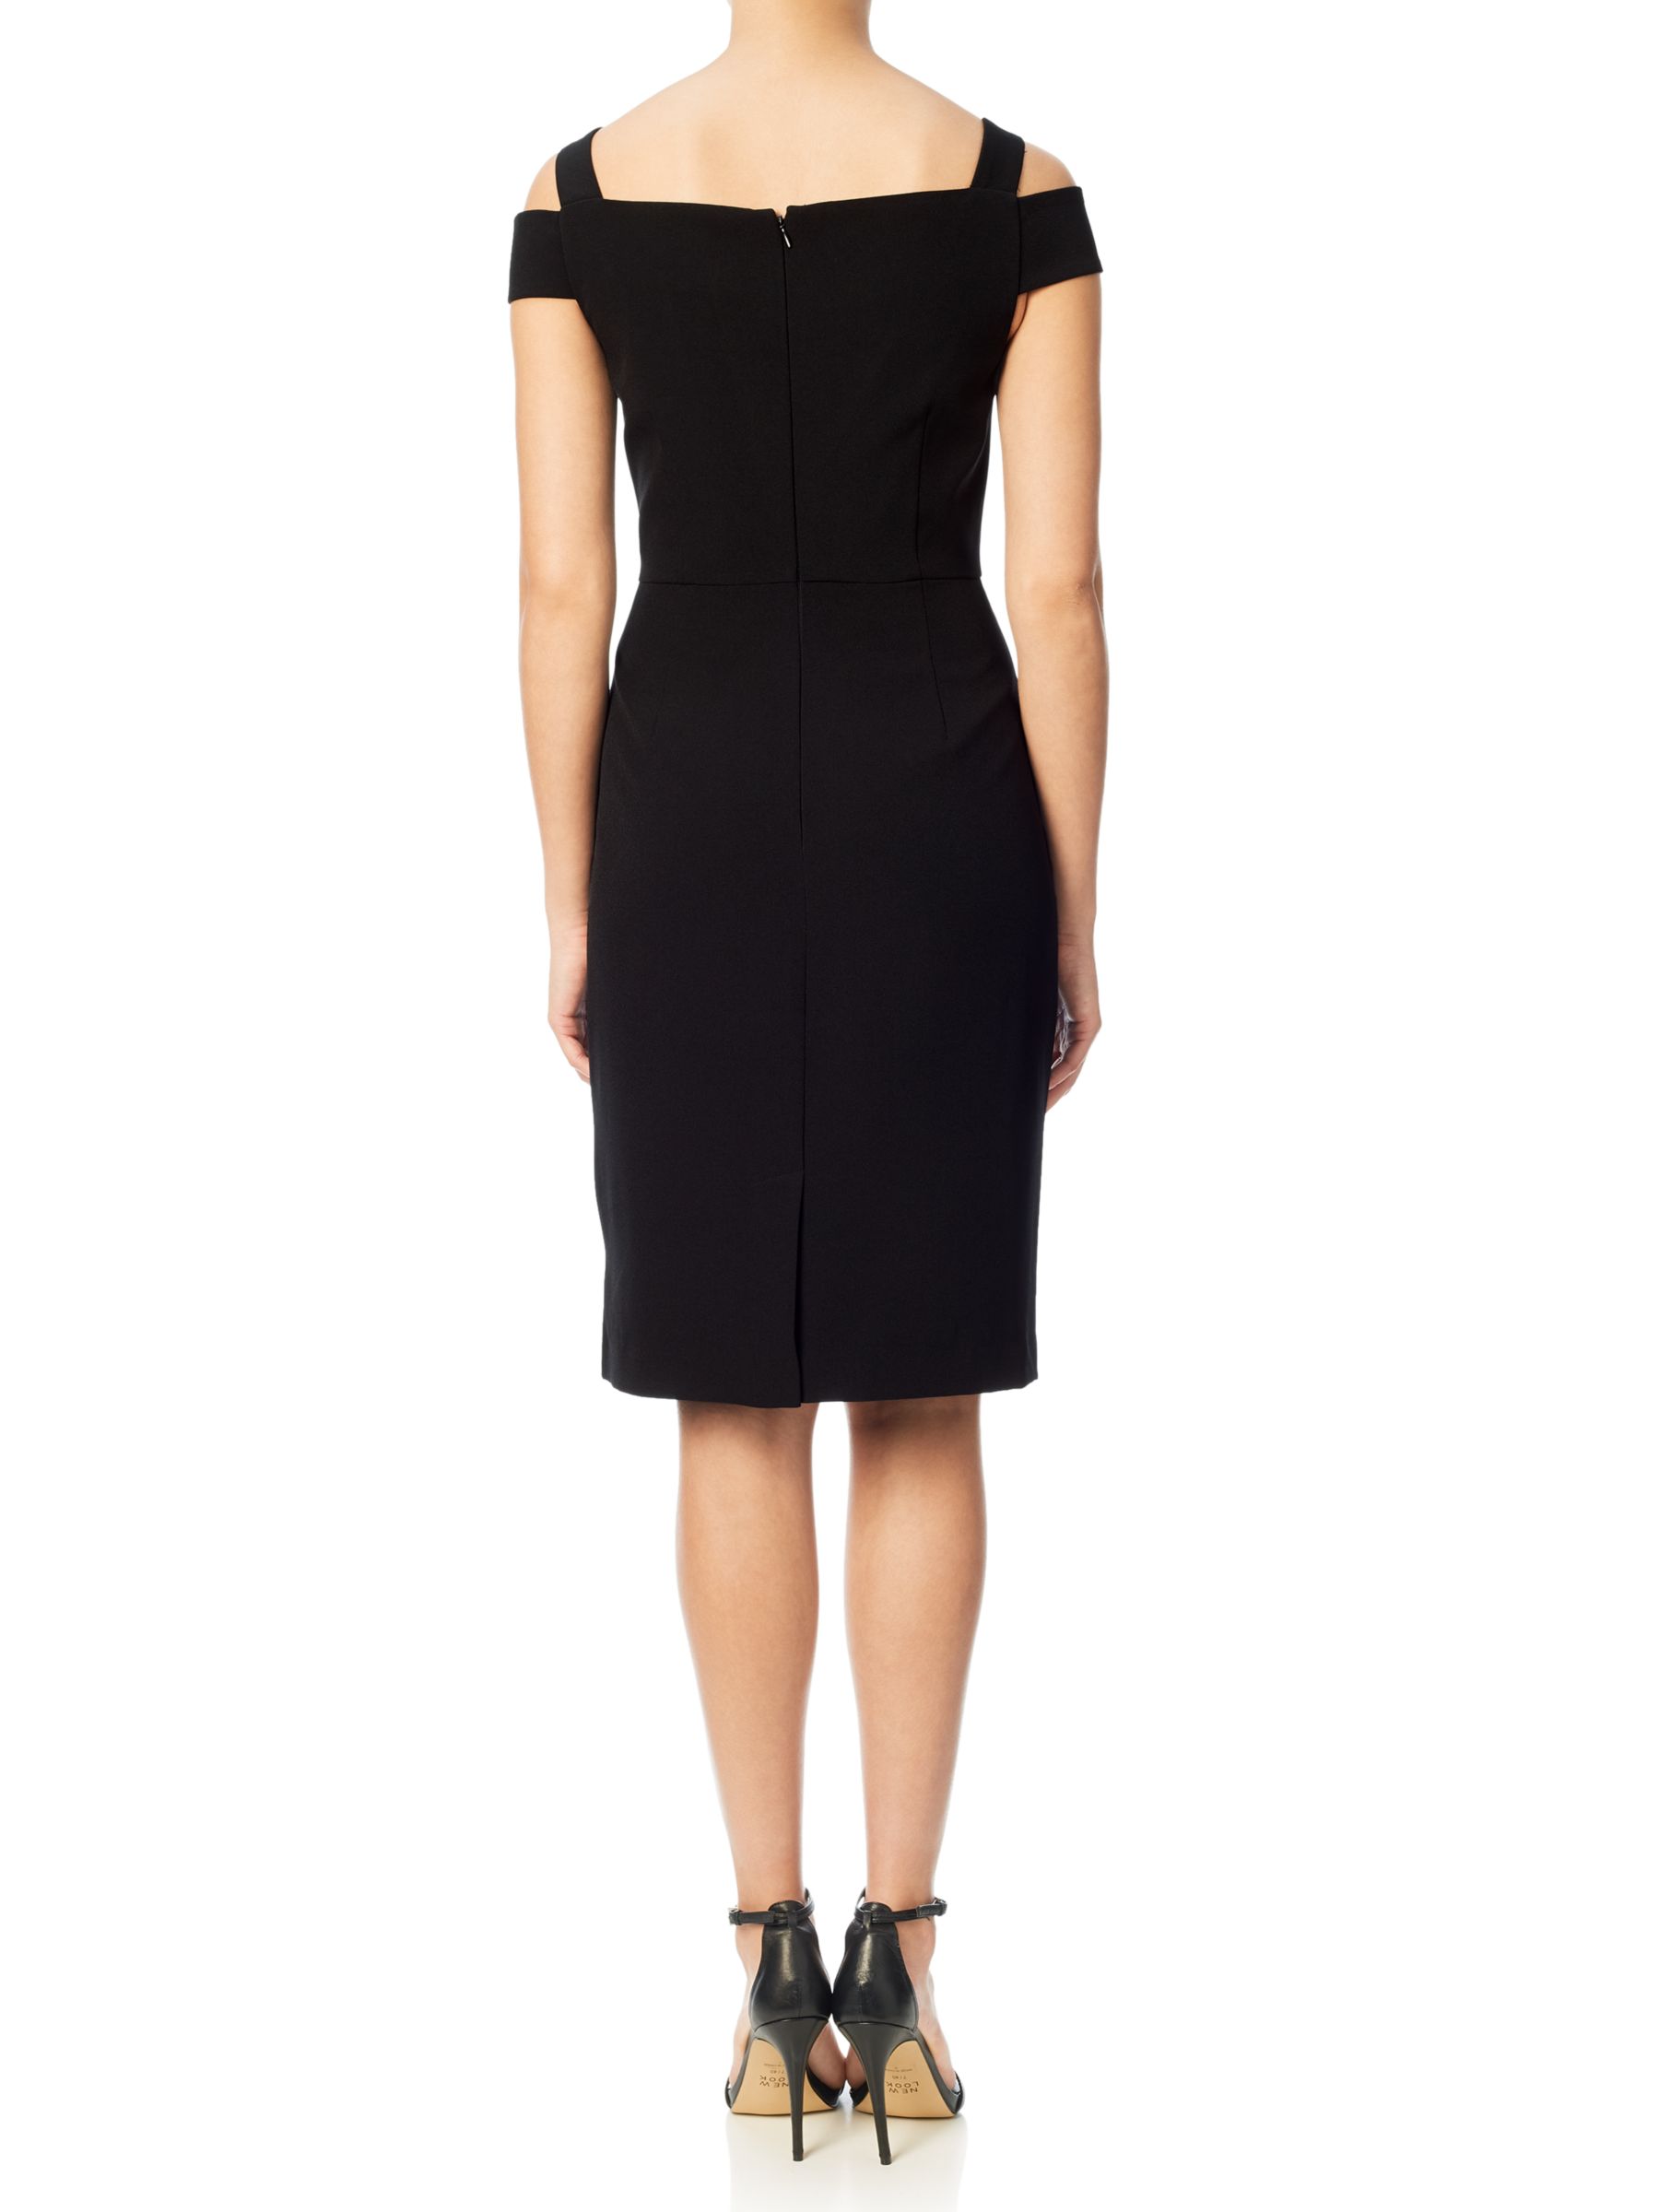 Adrianna Papell Cold Shoulder Fitted Sheath Dress, Black